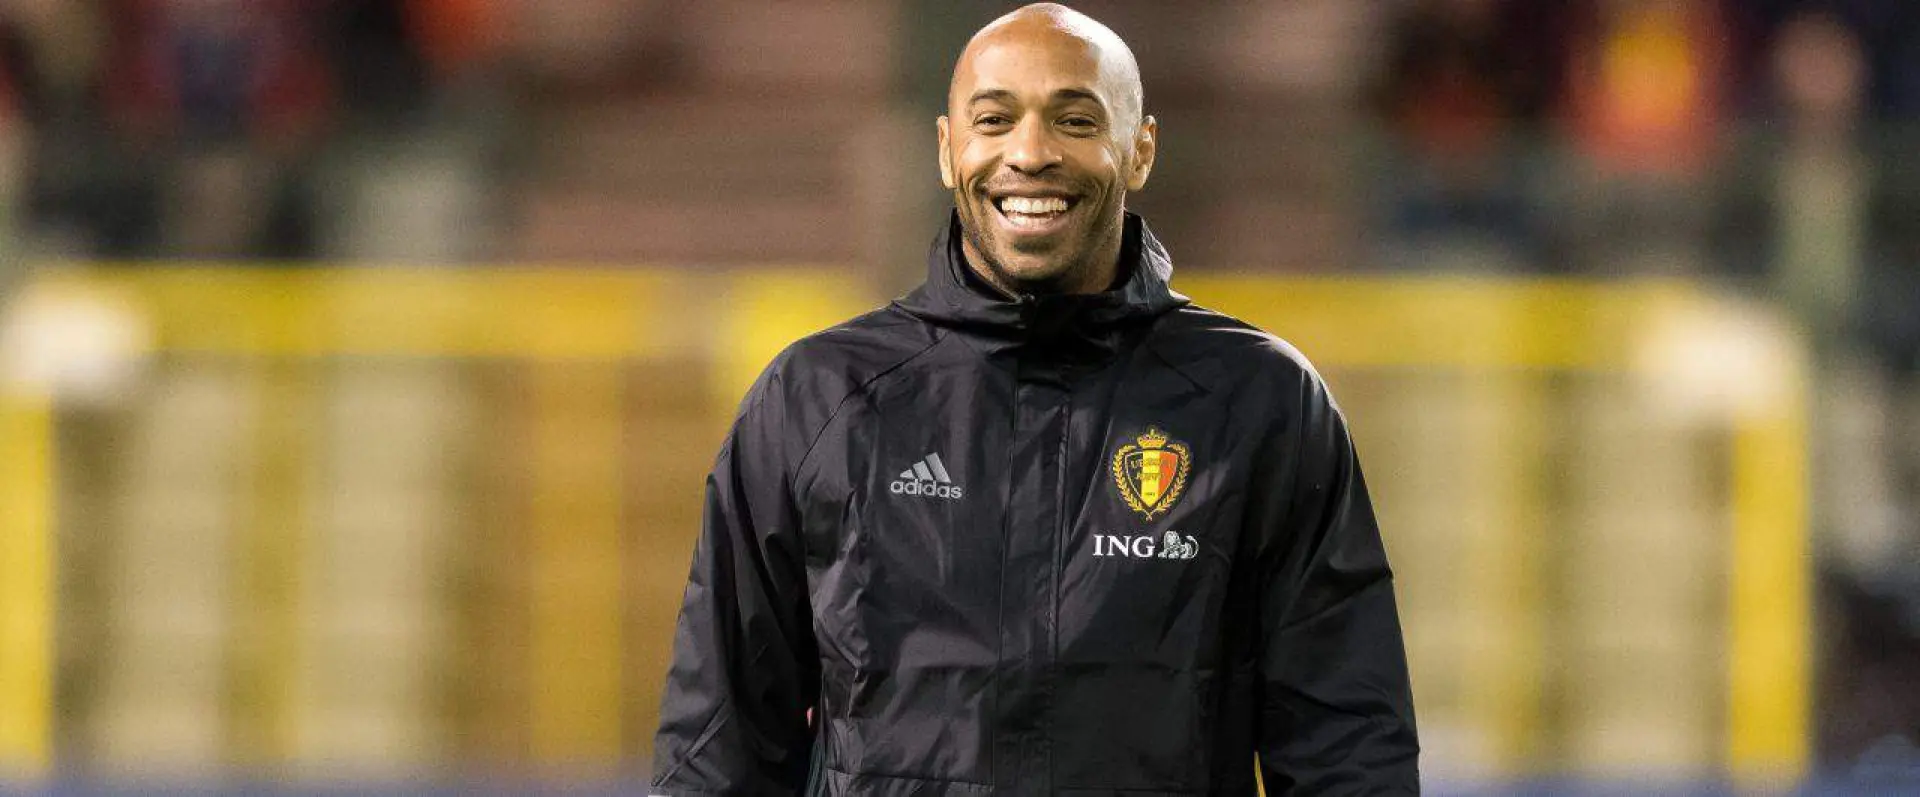 Thierry Henry football